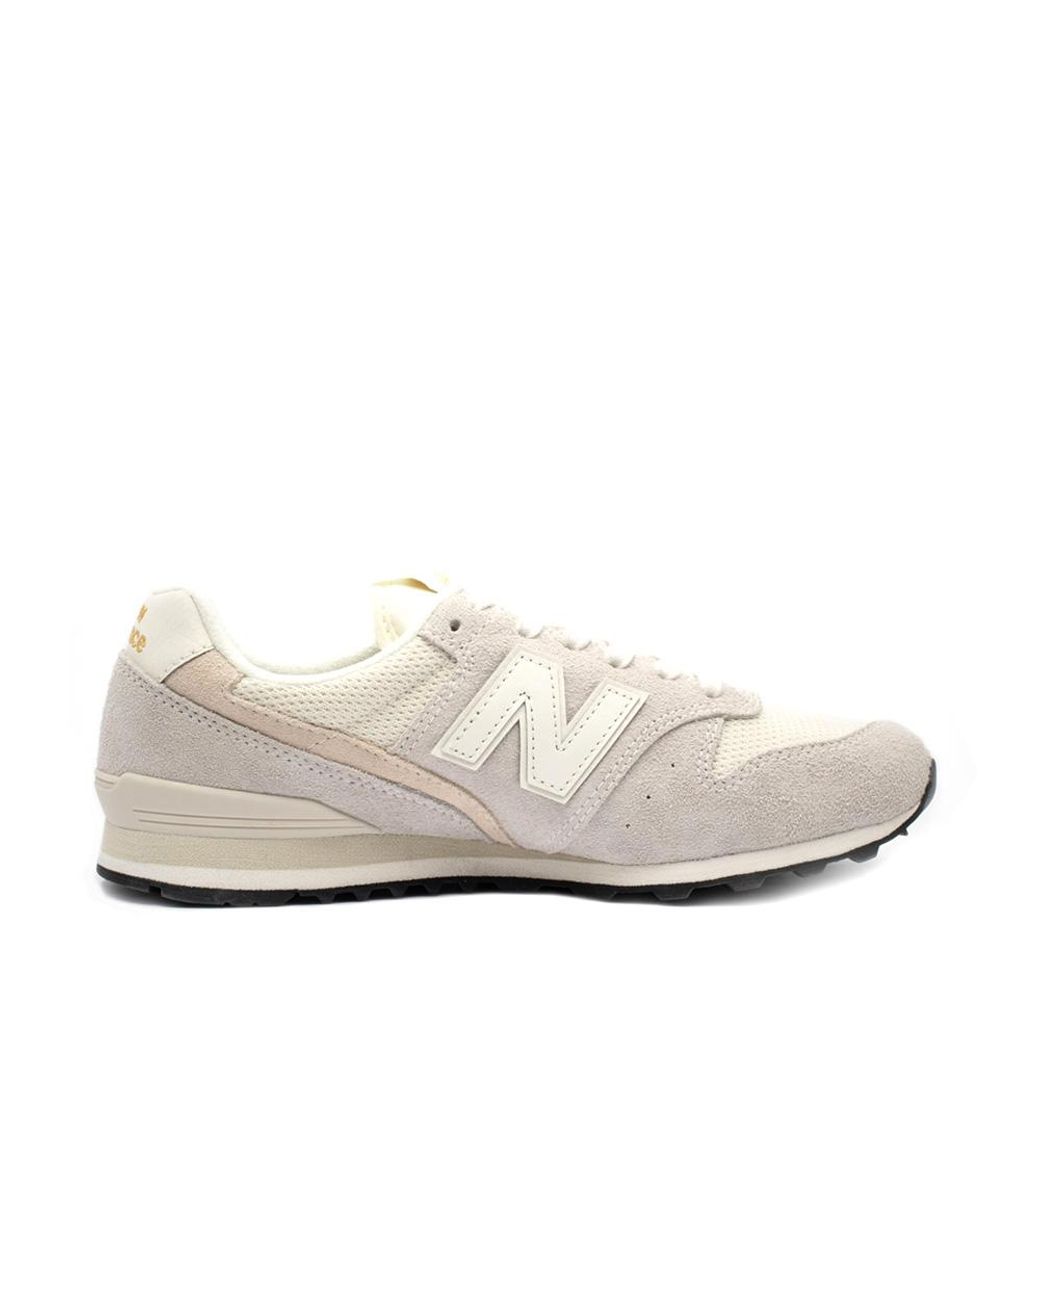 New Balance Rubber Angora With Sea Salt 996 Shoes in White | Lyst